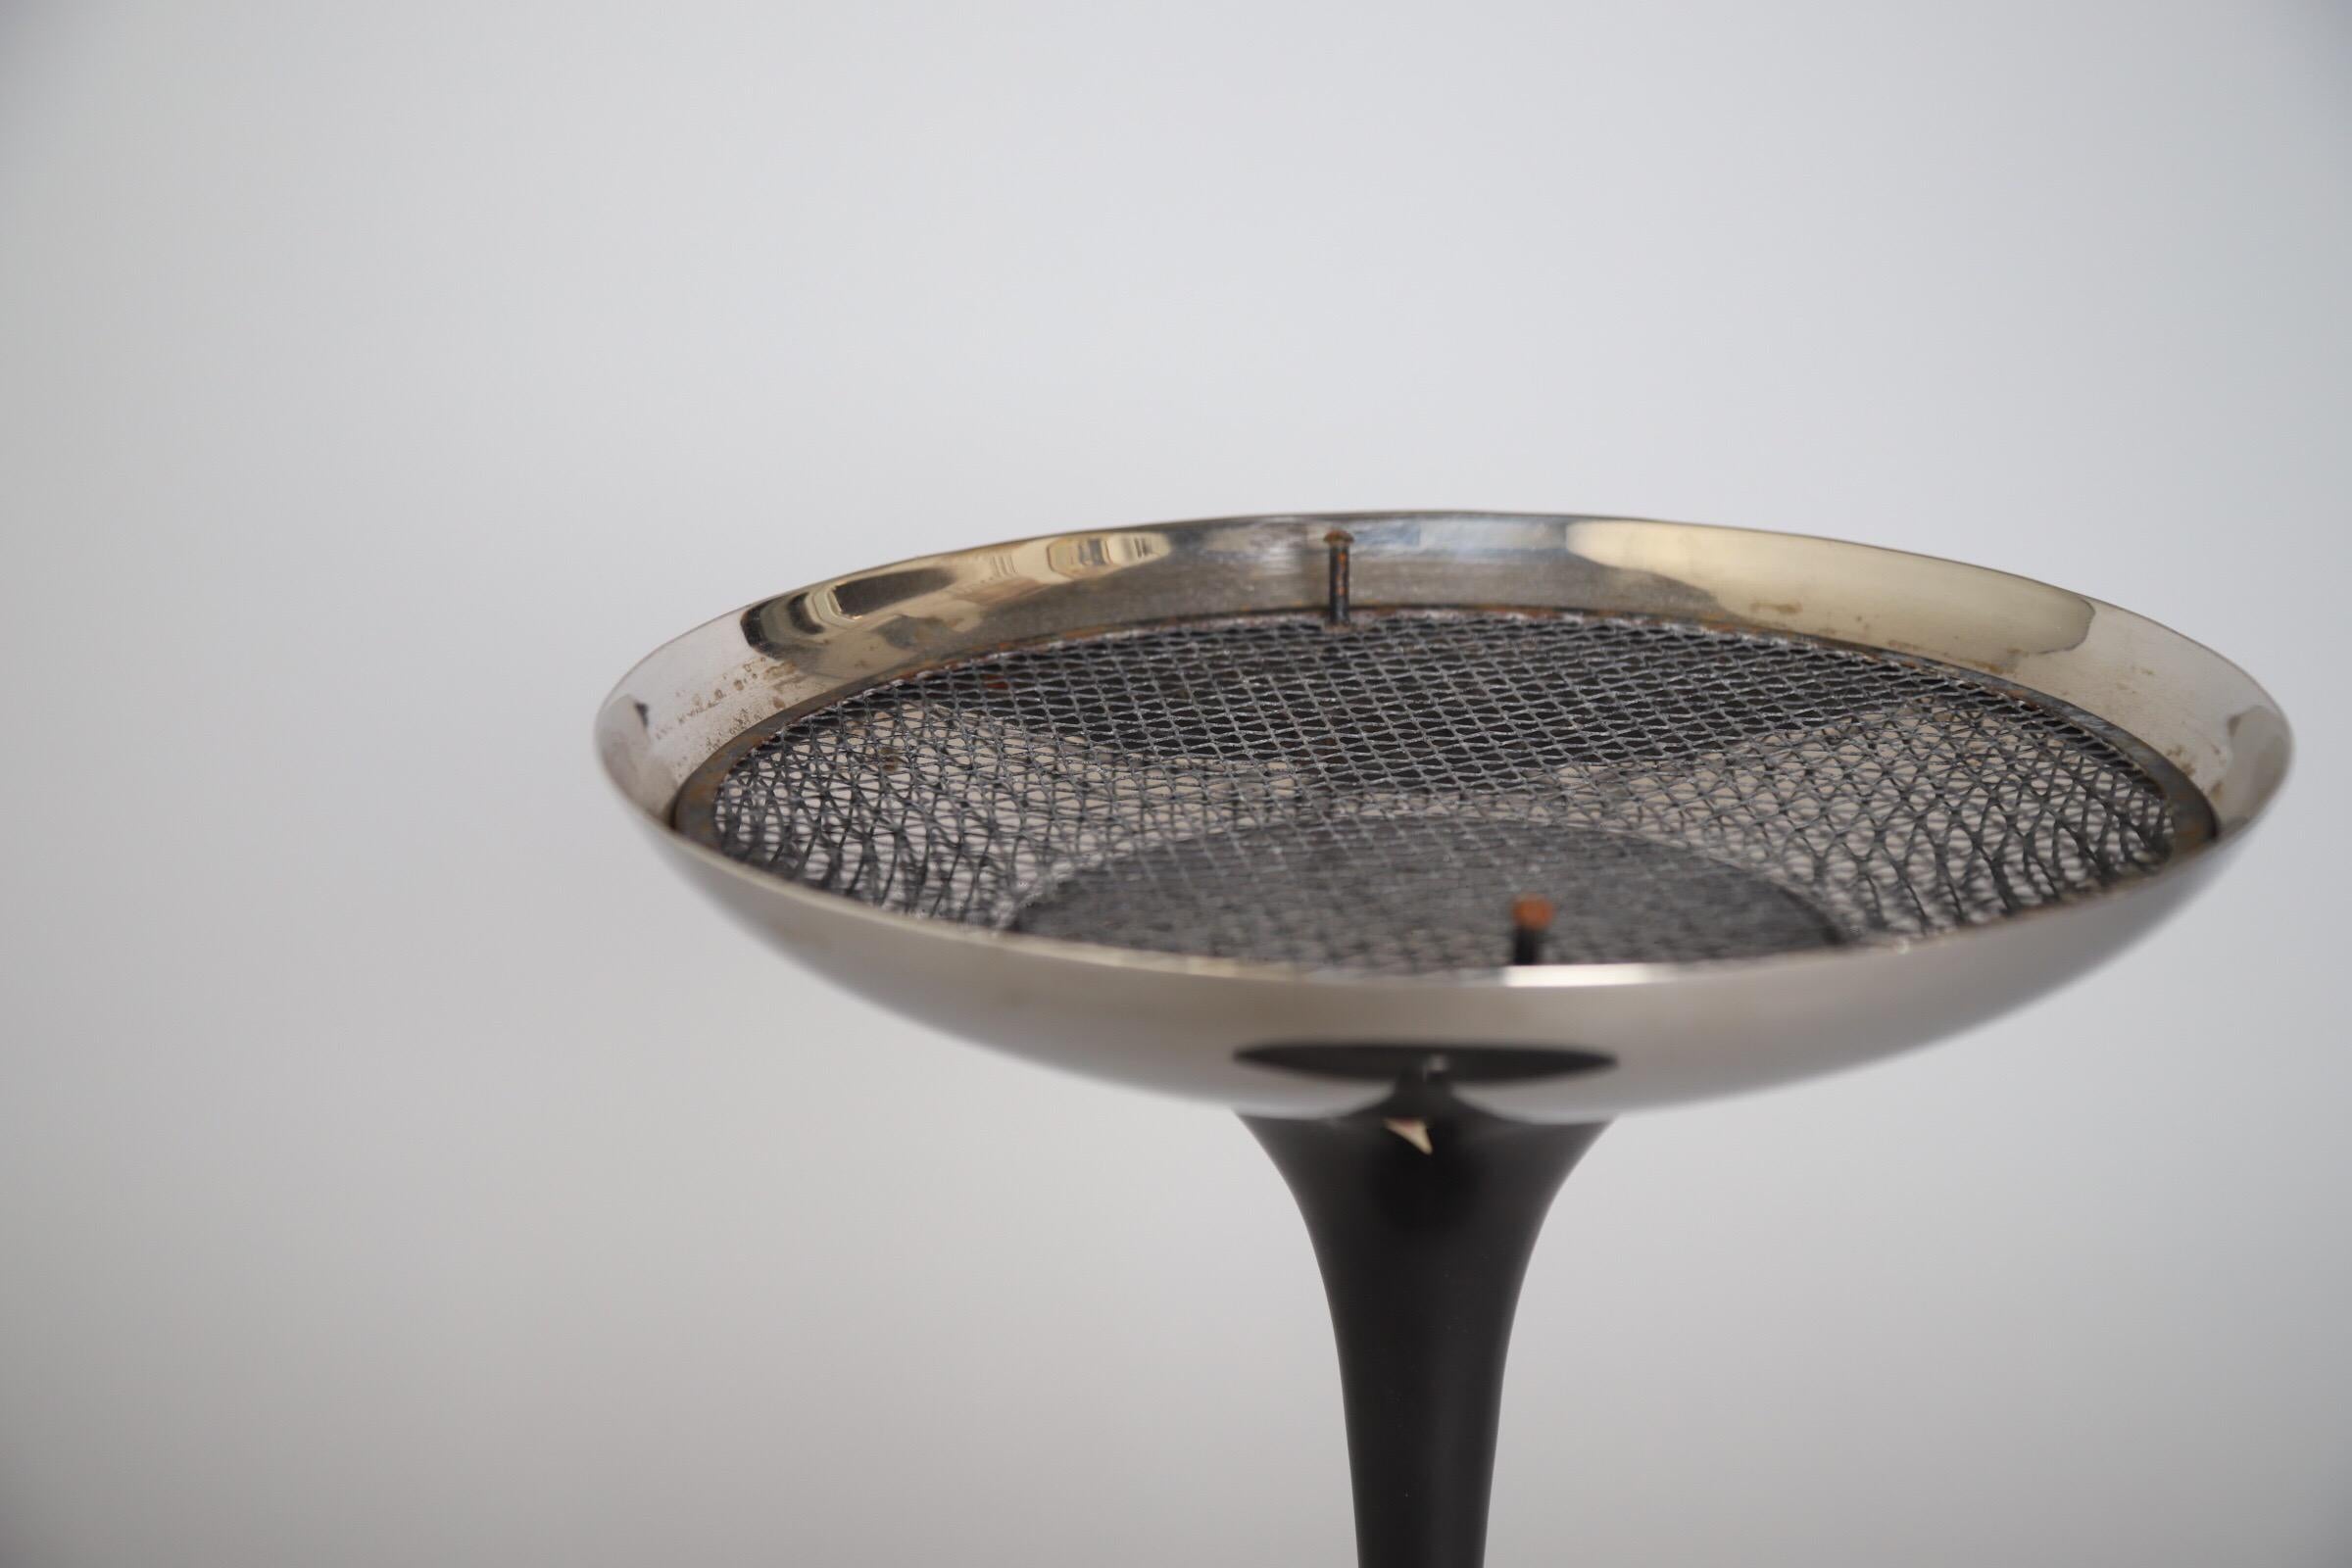 Smoke it if you got it. 

Ashtray designed by Eero Saarinen for Knoll International. Tray is in great shape with a wonderful shine. The black base shows some scratches but nothing major. Screen has both feet and is completely intact. Add sand and